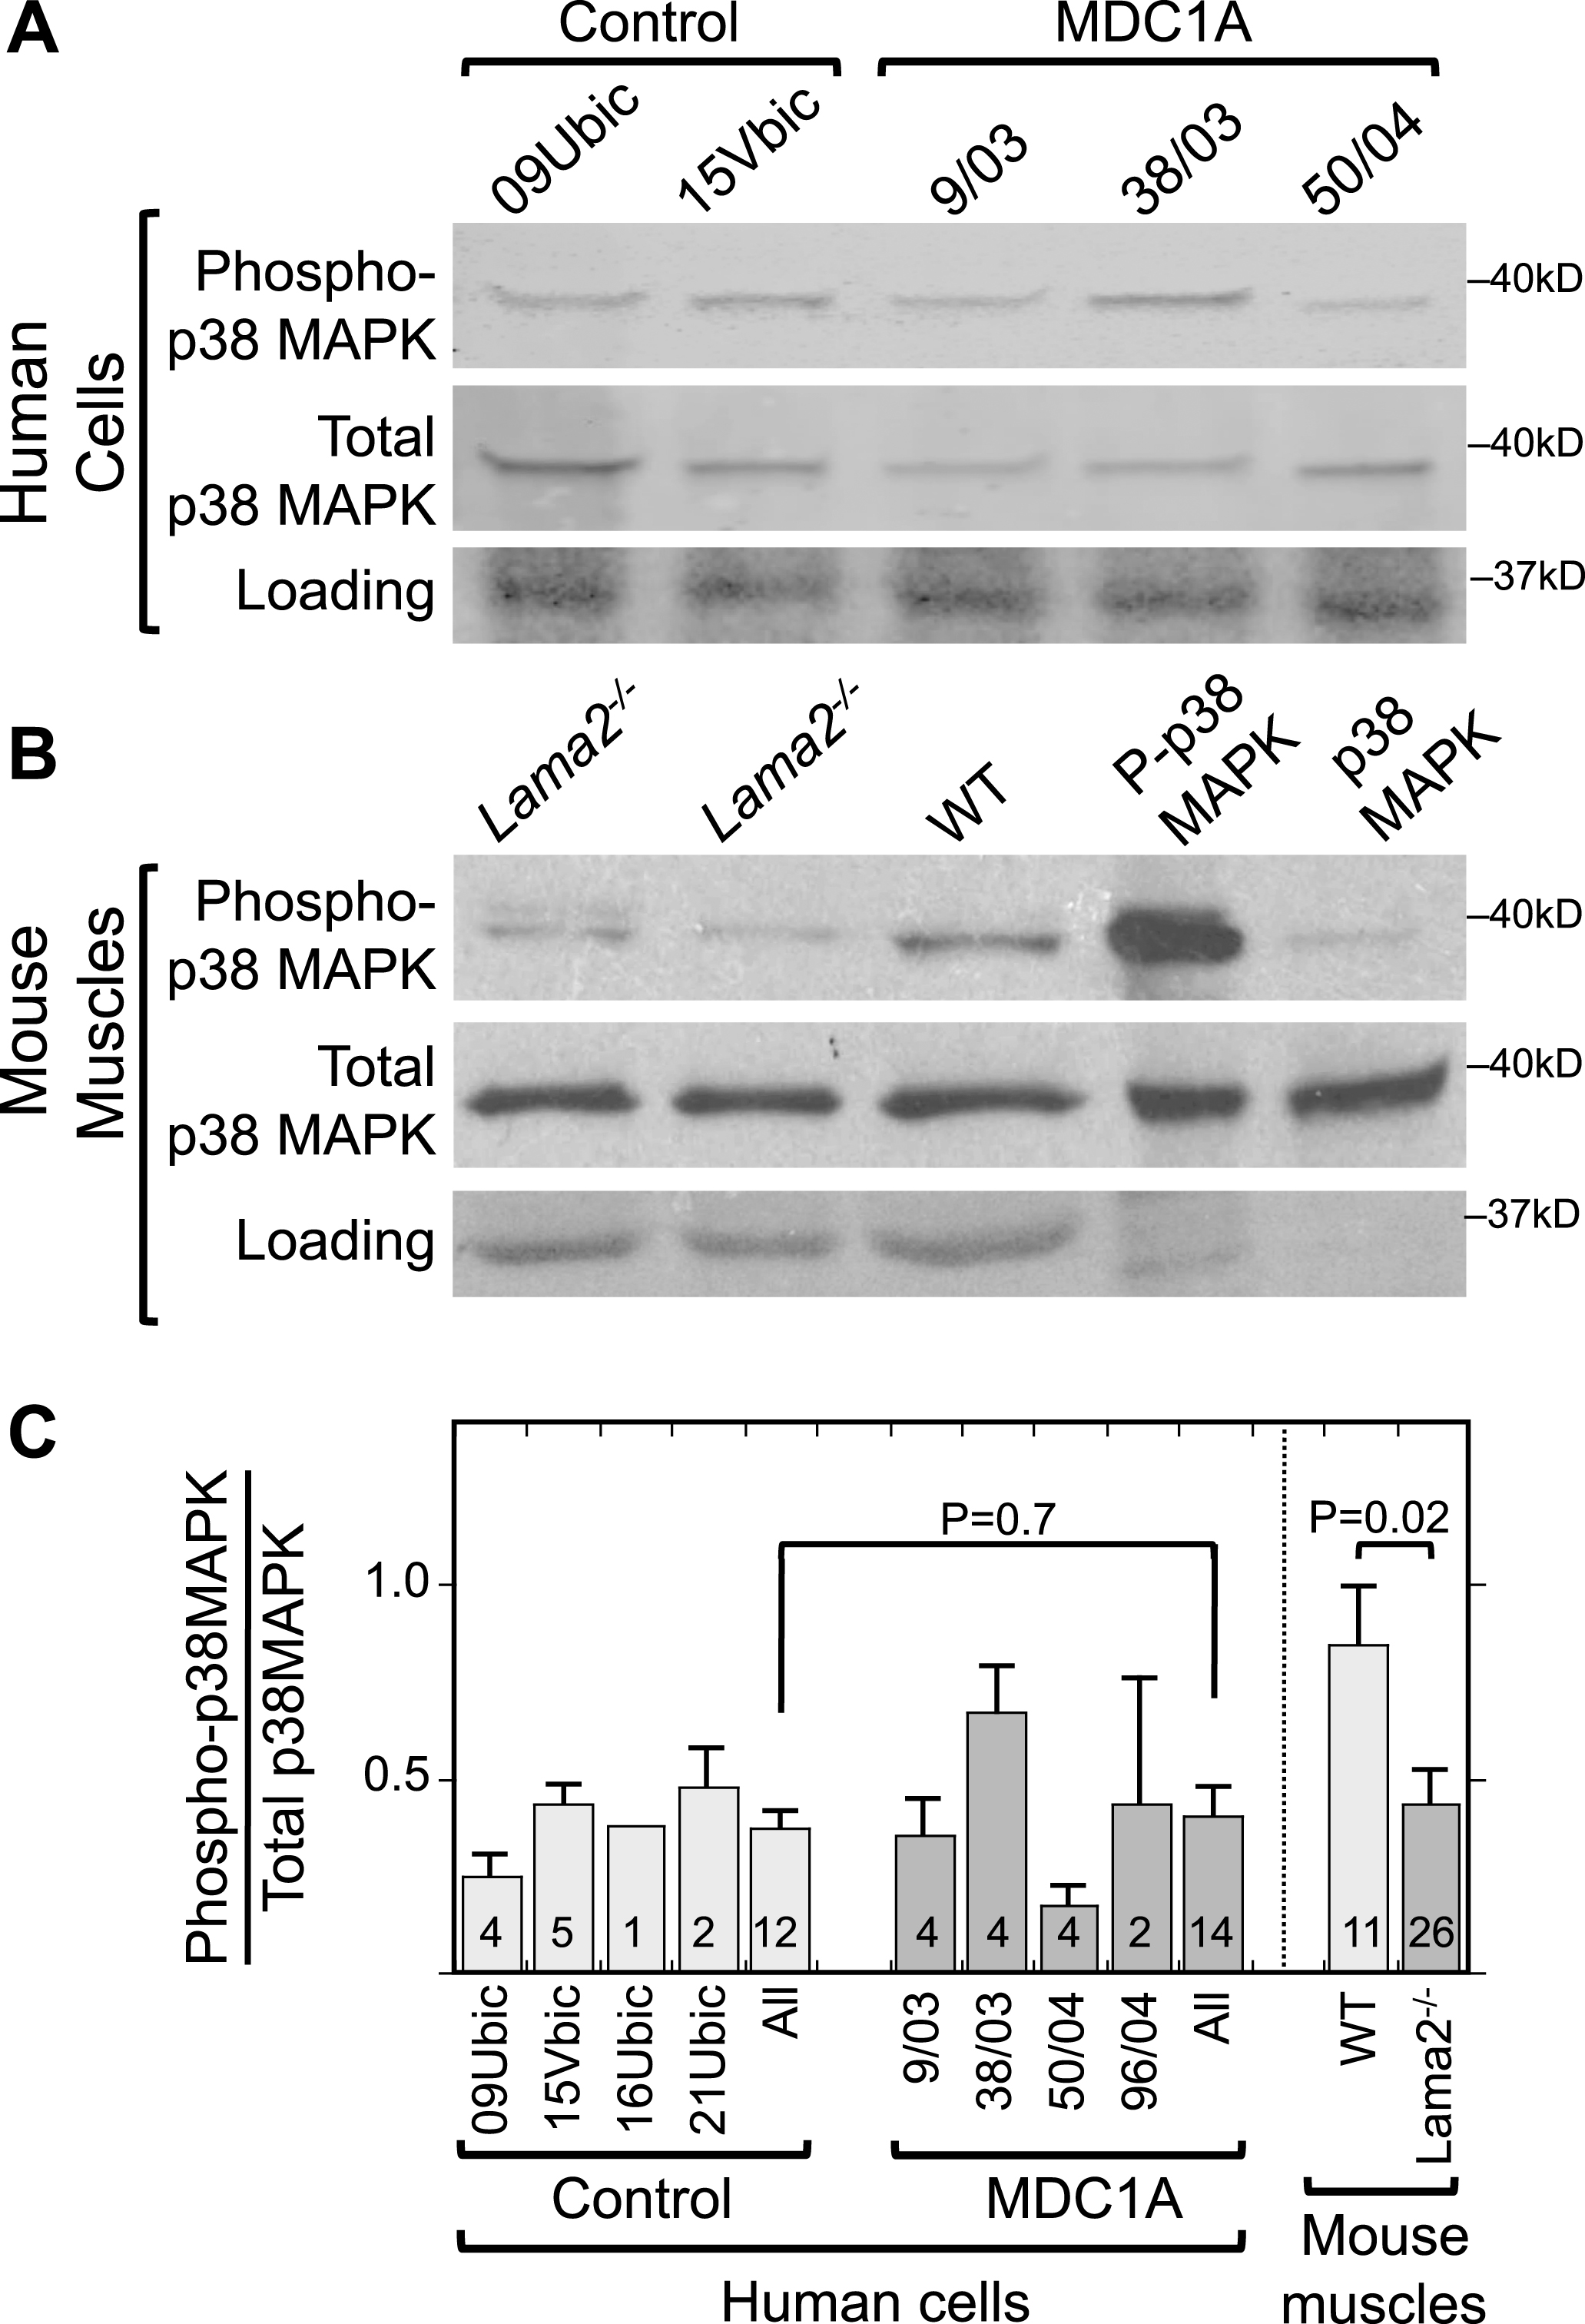 Increased phosphorylation of p38 MAPK is not associated with laminin-alpha-2-deficiency. A. Immunoblots of lysates of 4d differentiated human myogenic cell lysates with antibodies specific for phospho-p38 MAPK (P-p38 MAPK) and total p38 MAPK showed that differentiated cultures of laminin-α2-deficient (MDC1A) and healthy control myogenic cells had similar levels and ratios of P-p38 MAPK to total p38 MAPK. One representative immunoblot is shown, see panel C for quantitation. 70μg of protein per lane. B. Similar immunoblots of mouse muscle lysates showed that phosphorylation of p38 MAPK tended to be decreased in quadriceps muscles from Lama2–/– mice compared to muscles from wild-type mice. One representative immunoblot is shown, see panel C for quantitation. 30μg of protein per lane. Loading control = Ponceau S stain. Lanes 4 and 5 included purified phospho-MAPK and MAPK proteins to serve as positive controls for antibody specificity and thus showed little or no staining in the loading controls. C. Quantitative densitometry of immunoblots showed that the P-p38 MAPK/Total p38 MAPK ratio was decreased at P = 0.02 in Lama2–/– compared to wild-type mouse muscles, whereas the ratio was similar in MDC1A compared to healthy control myogenic cells. Identities of individual control and MDC1A donor cells are as indicated. All = average of results from cell cultures of all healthy control (light gray) or all MDC1A (dark gray) donors. Error bars = SE. P values from unpaired T-test of all control vs. all laminin-α2-deficient samples with n as indicated.